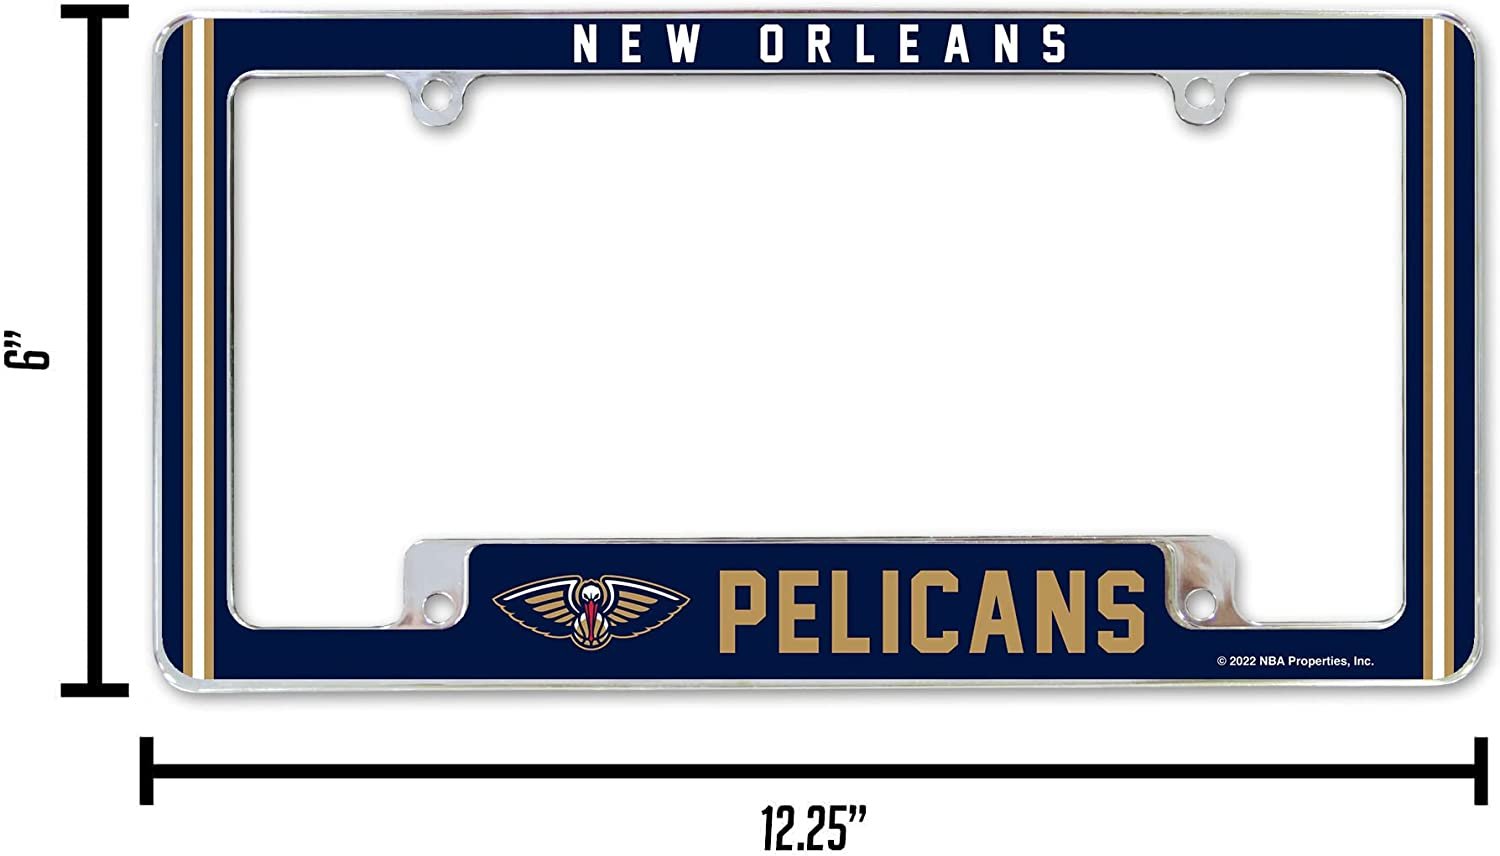 New Orleans Pelicans Metal License Plate Frame Chrome Tag Cover Alternate Design 6x12 Inch